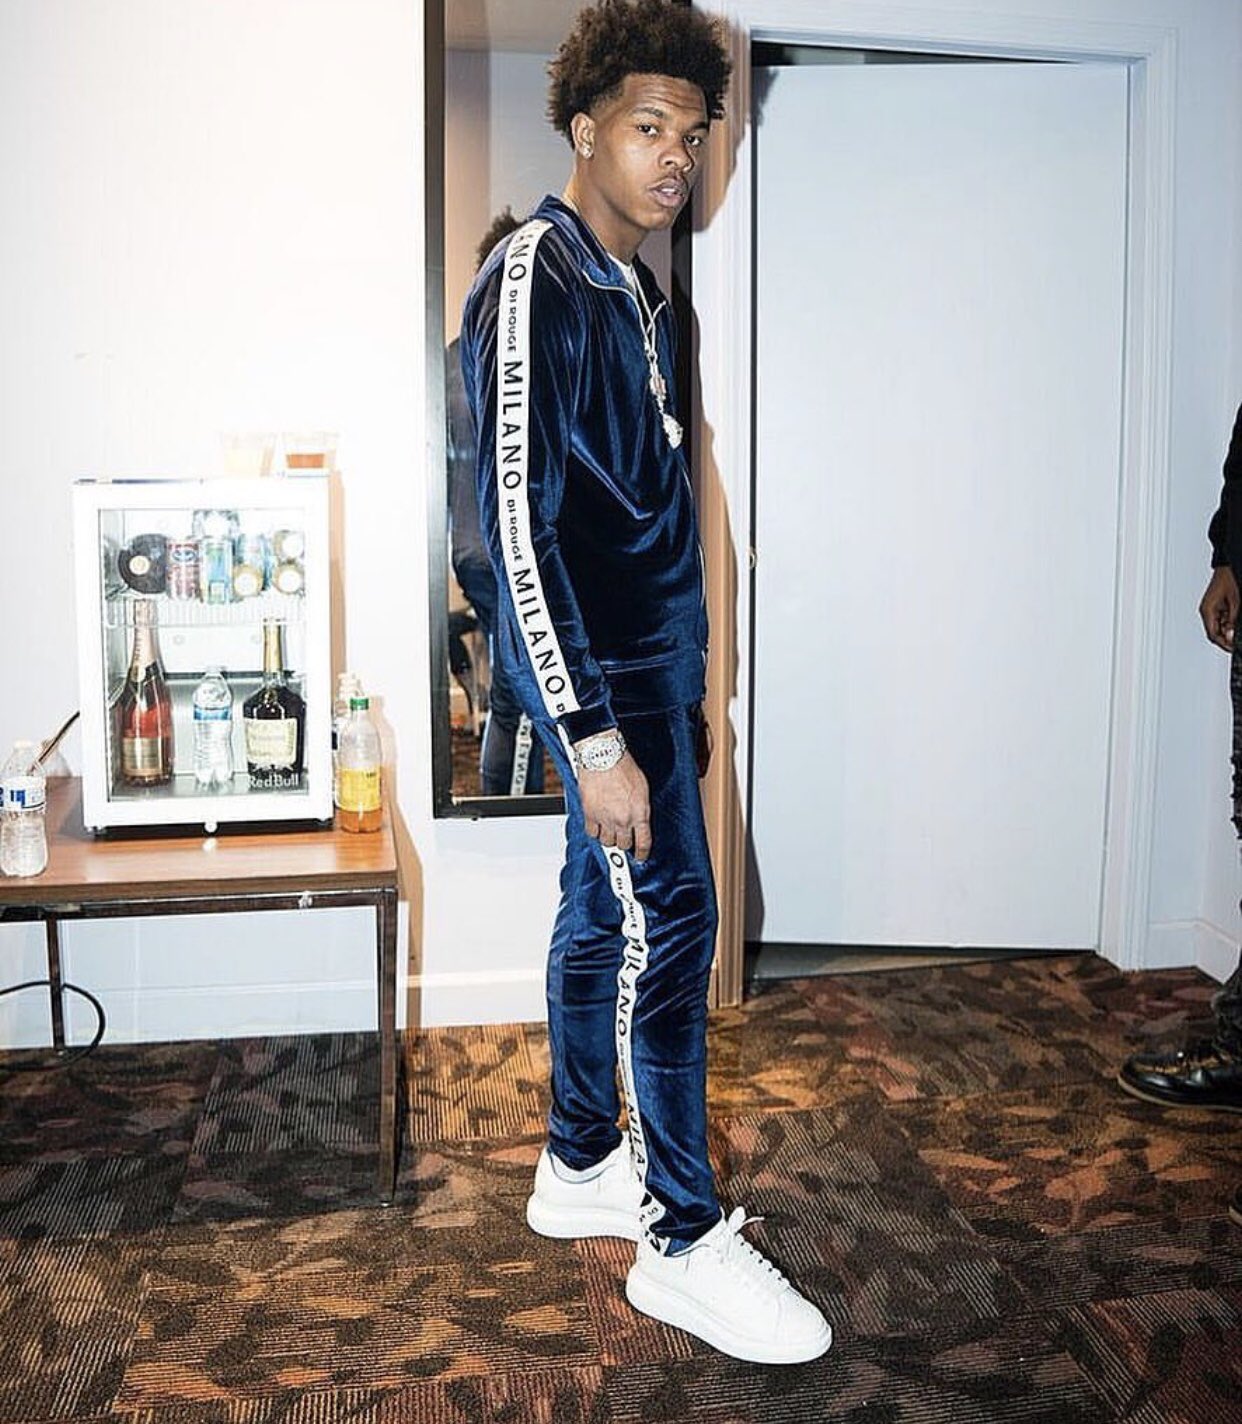 Motown Records on X: “Coach used to always say, 'Lil Baby got that swag,  he the definition of a real Atlanta dude.'” - Quality Control CEO Pee 💸  Check out @lilbaby4PF's feature